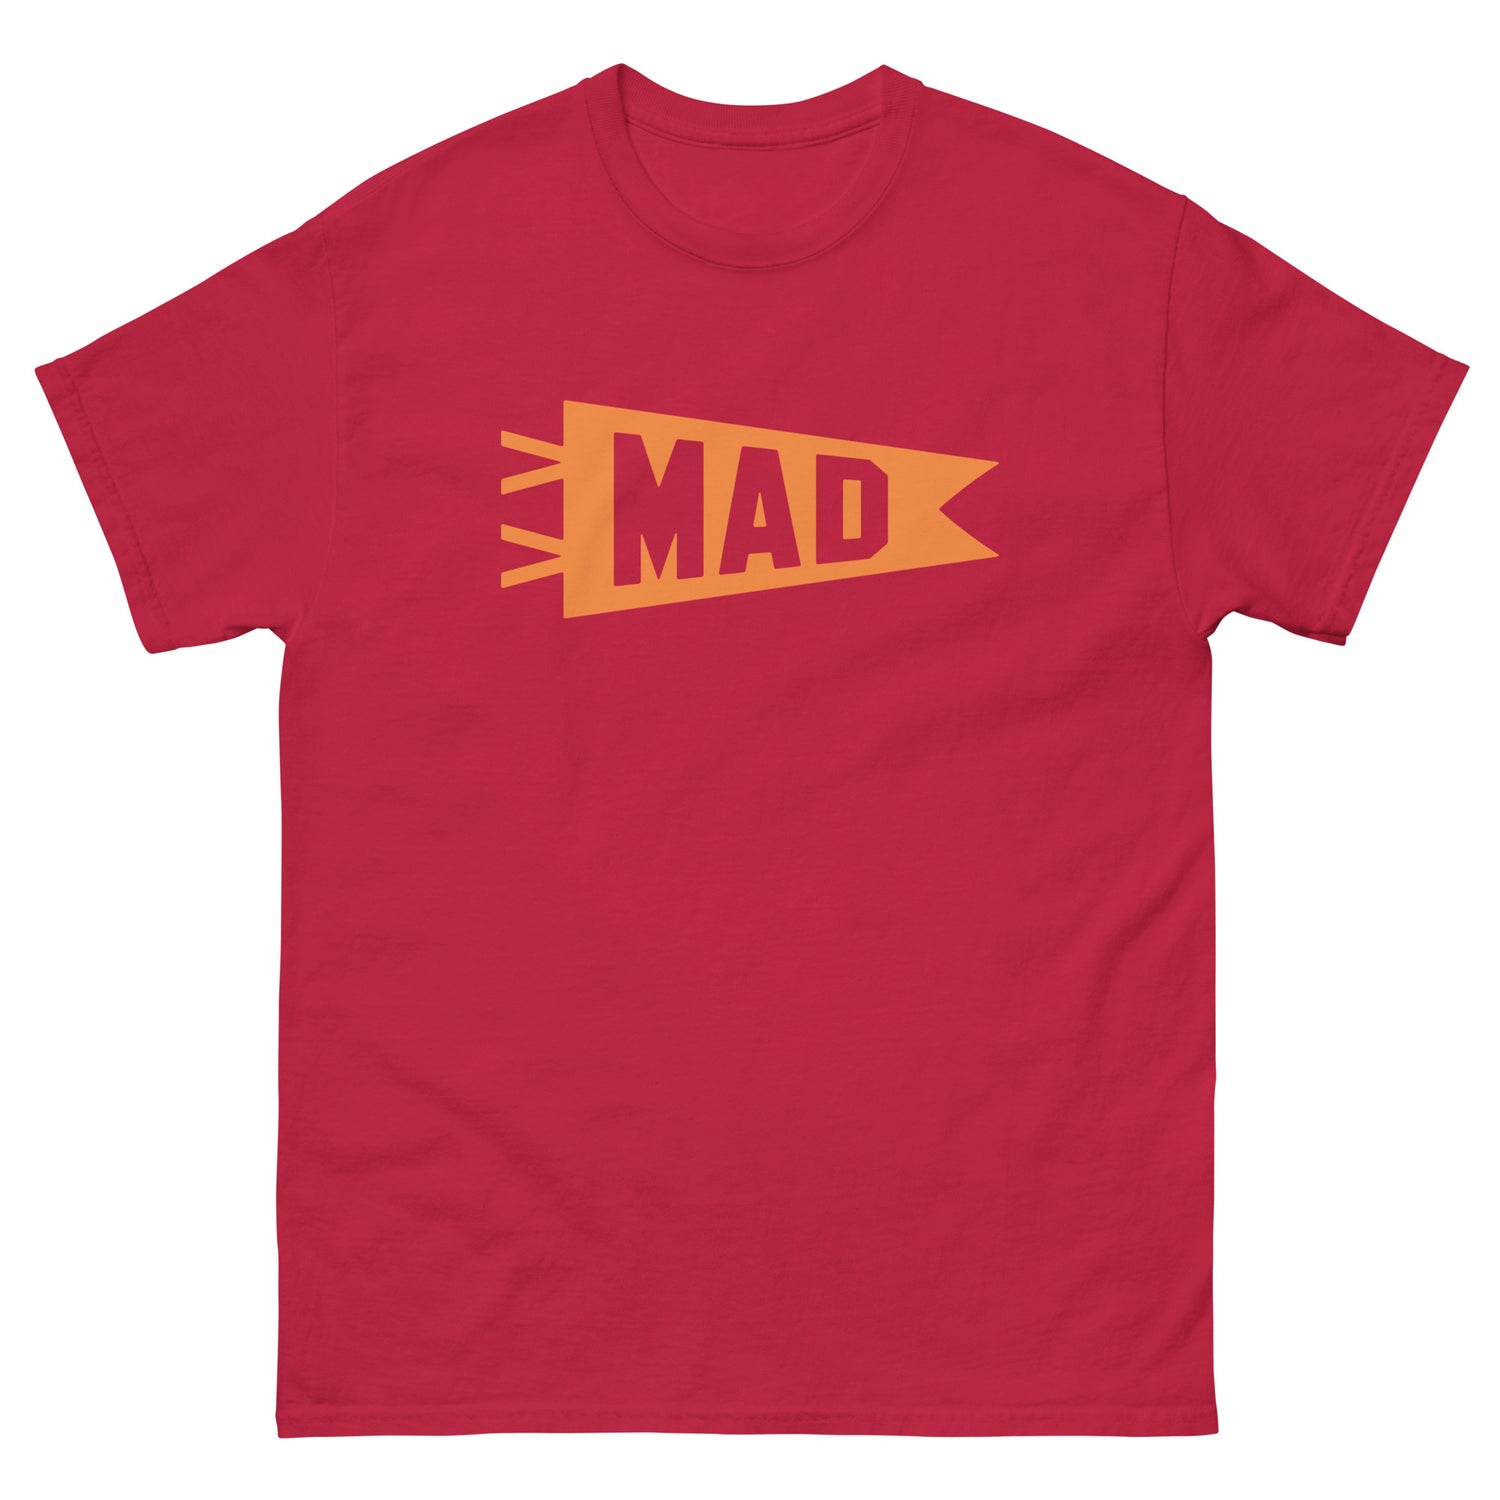 Madrid Spain Adult T-Shirts • MAD Airport Code